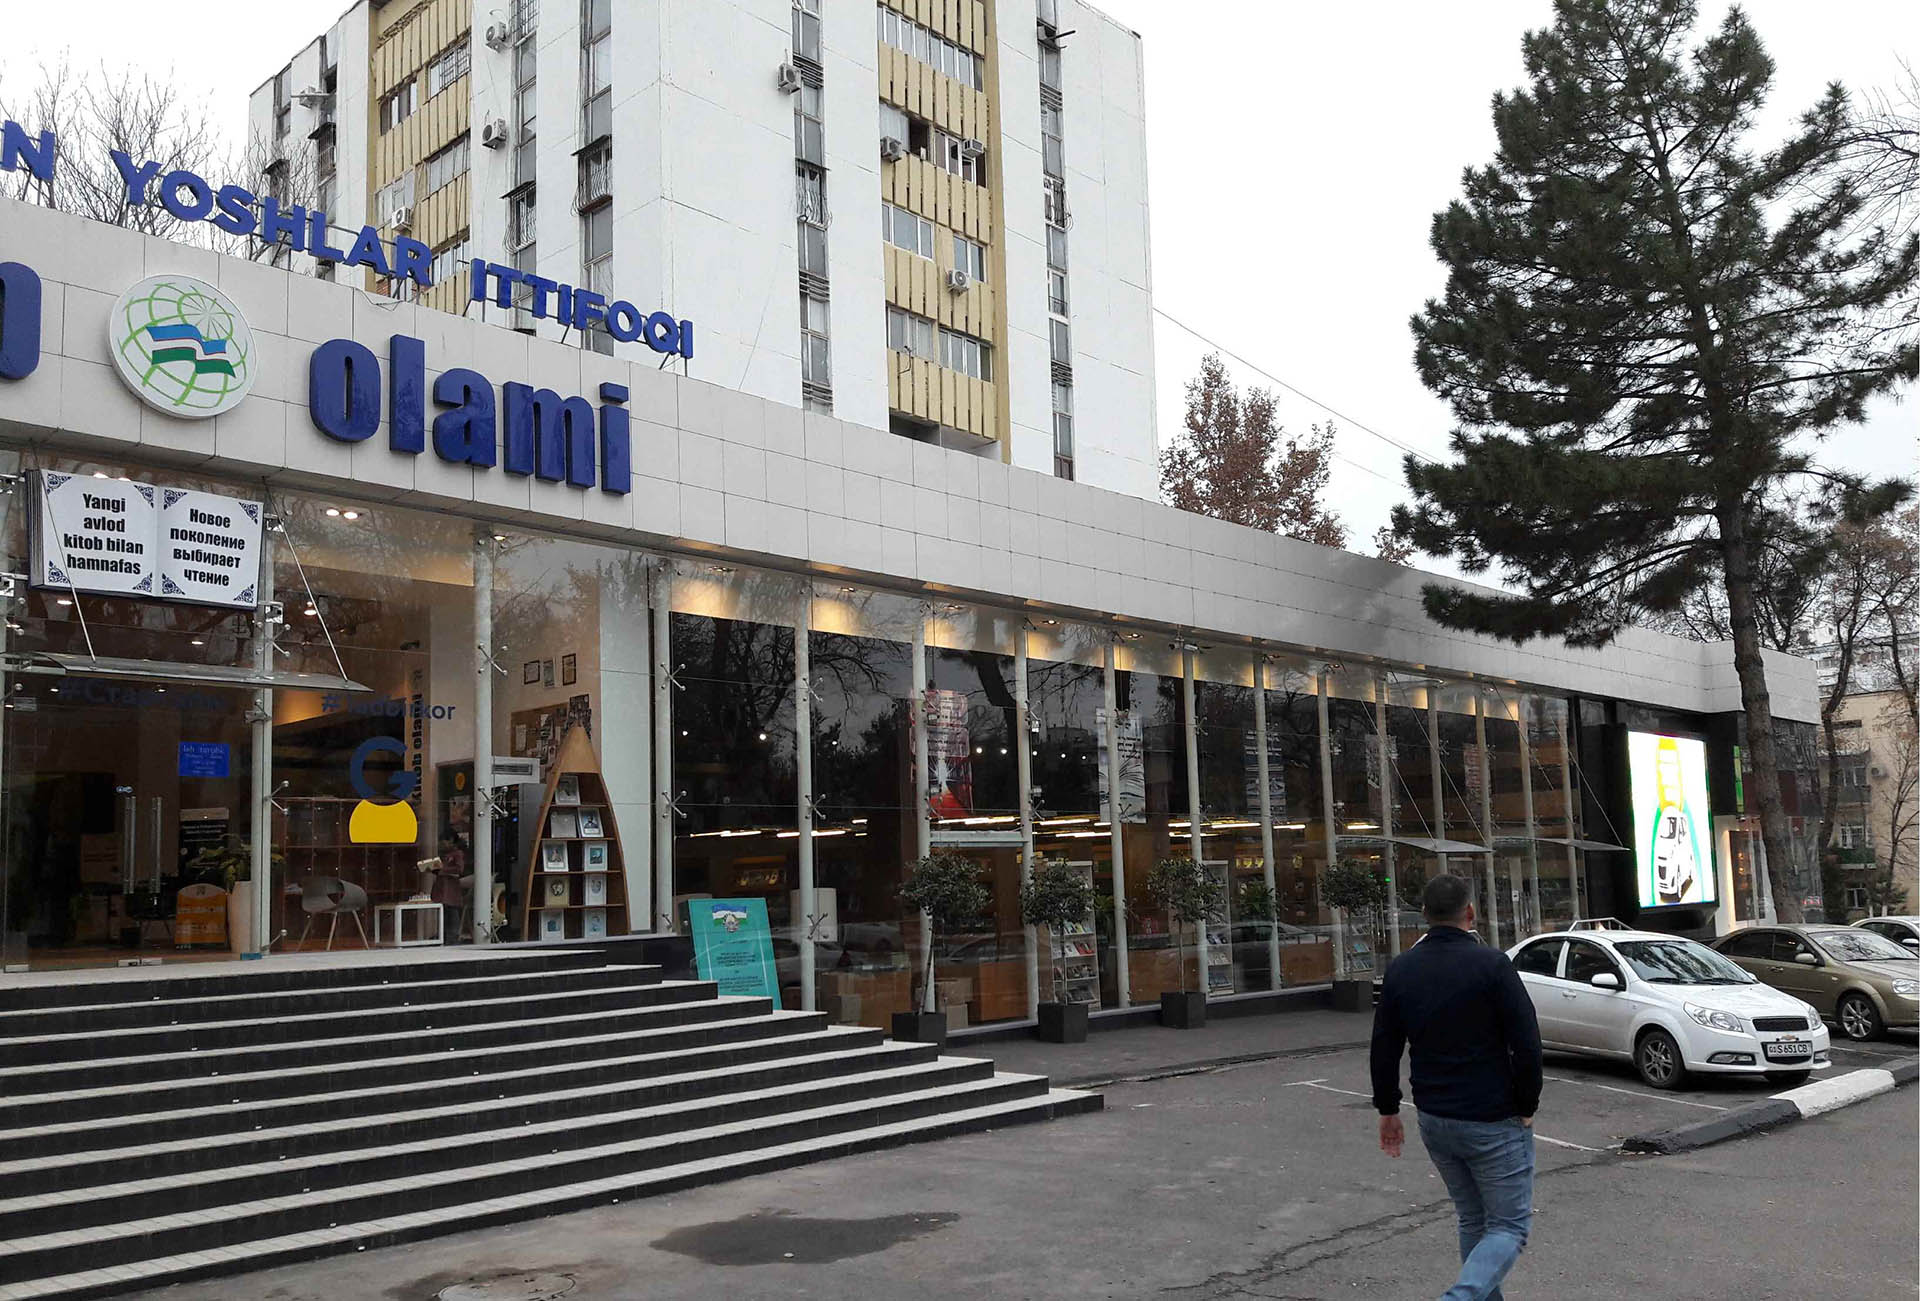 <p>Main facade. The Kitob Olami or "Book World" complex is a reconstruction of a shopping centre building dating from 1968.</p>